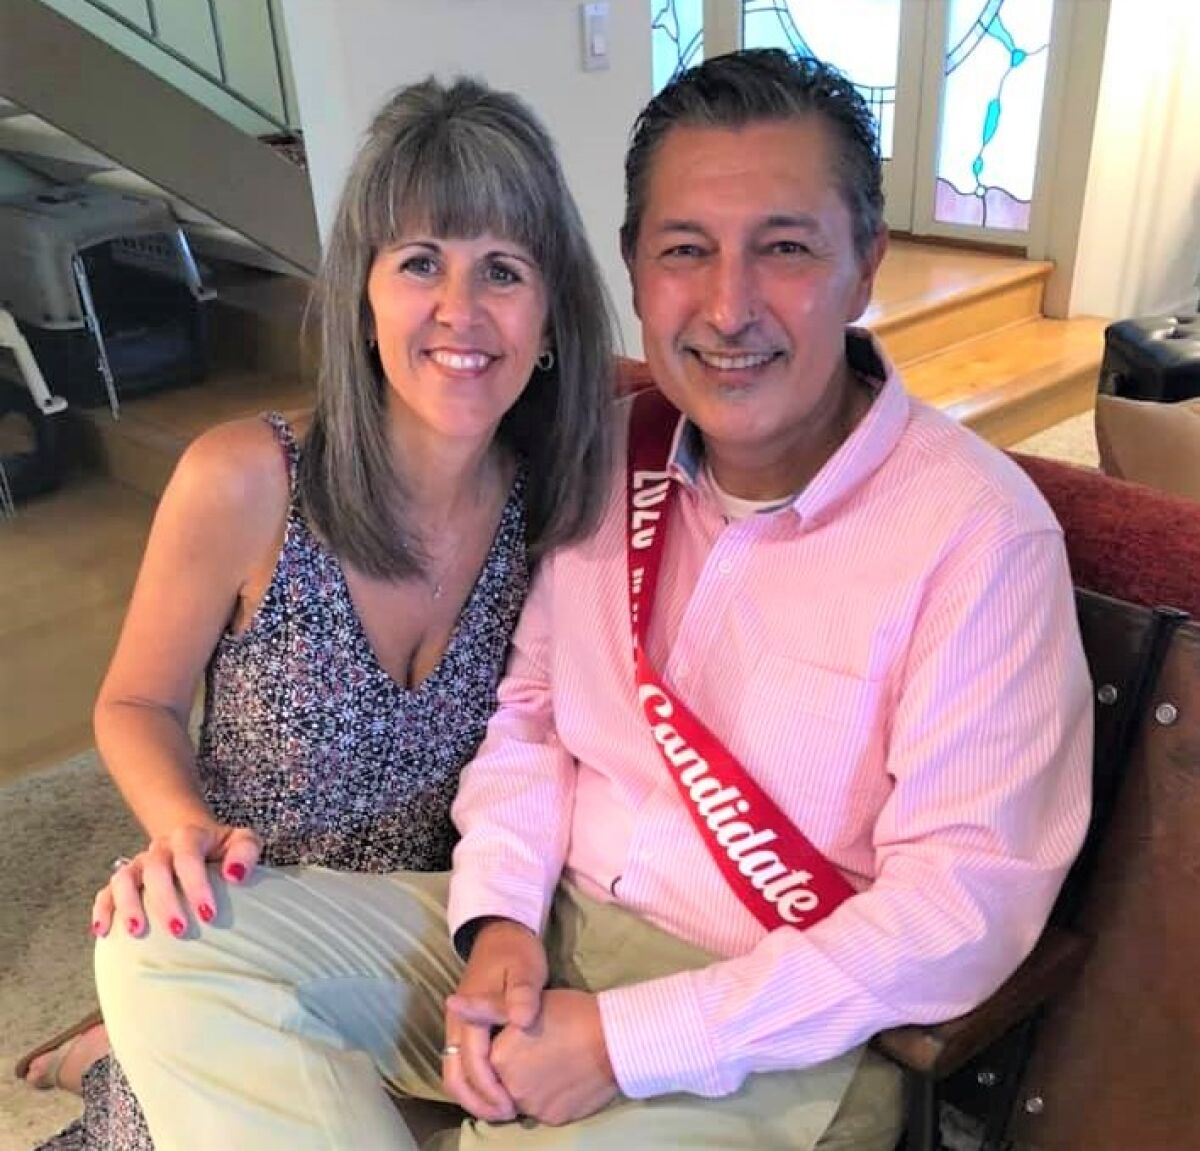 Sonny Talamantes met Cindy Crist while being treated for non-Hodgkin's lymphoma. She helped him campaign for Man of the Year.